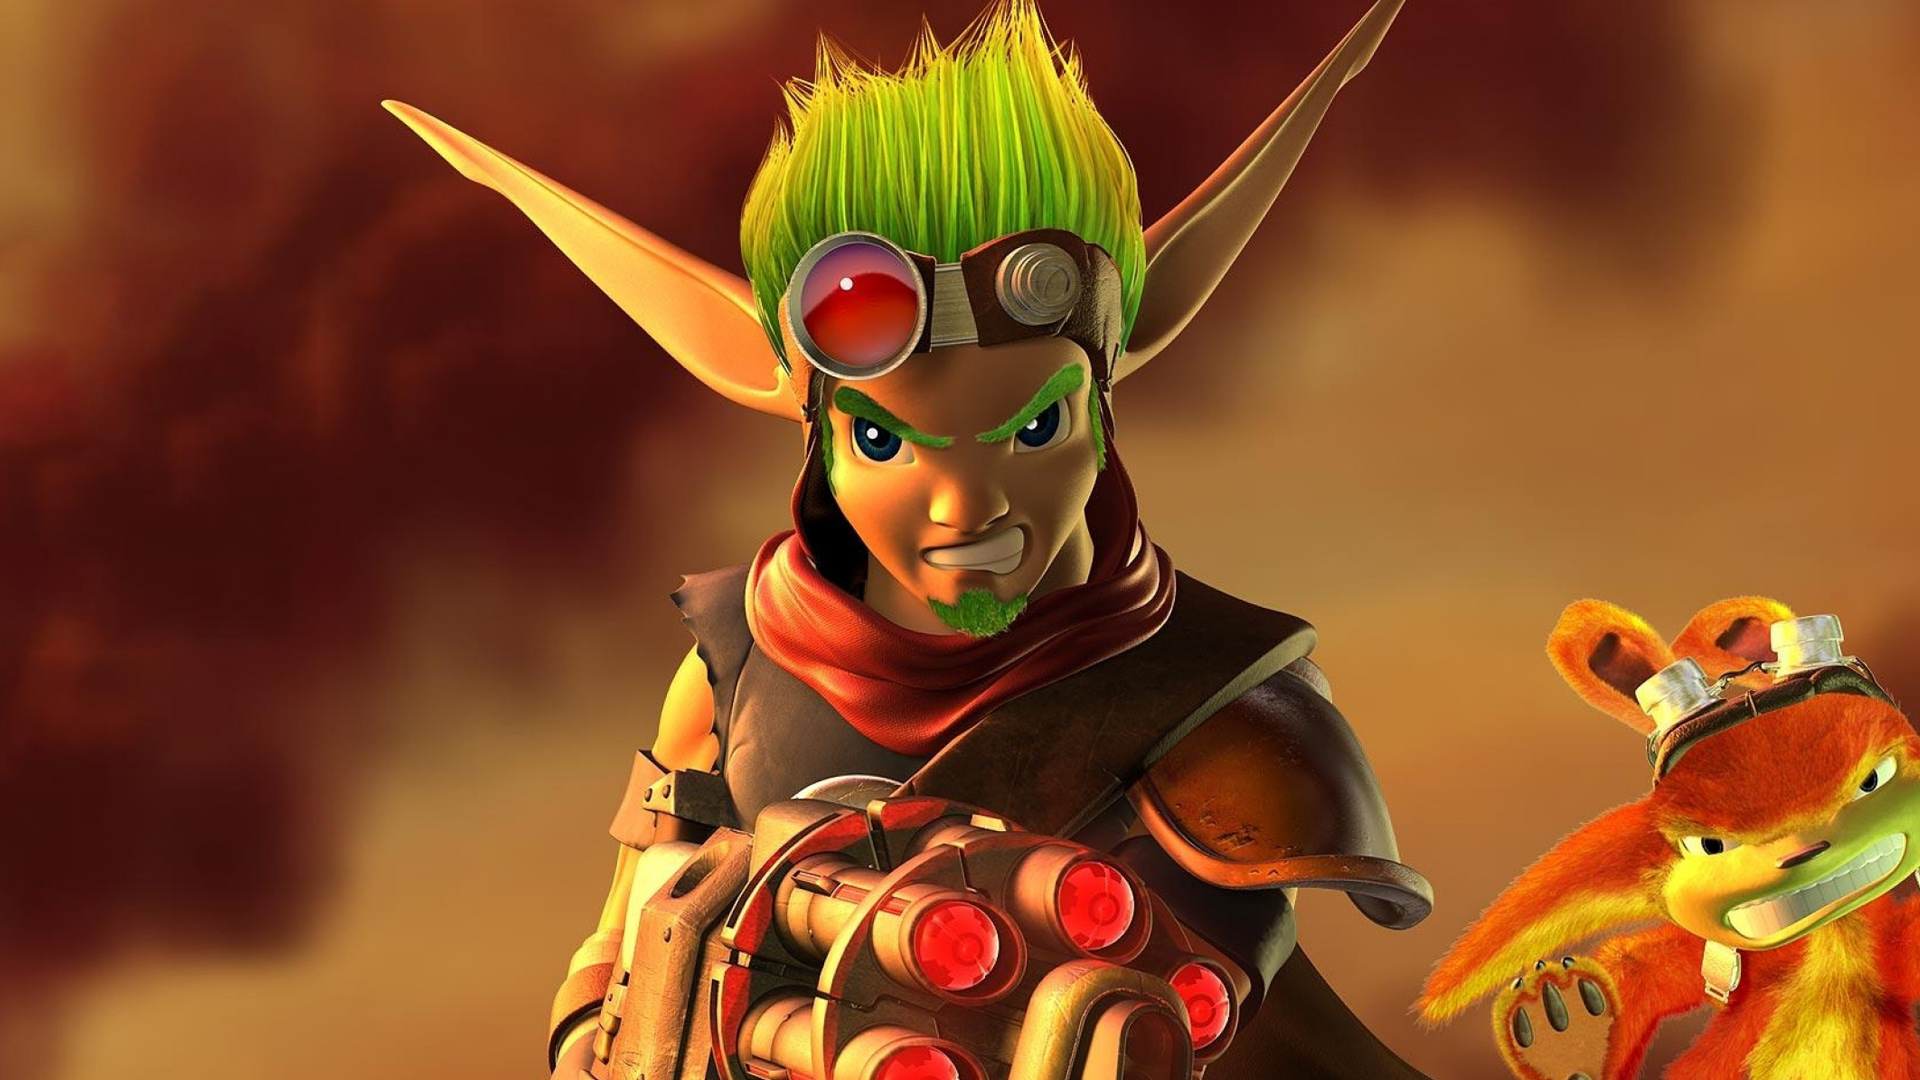 real ages of video game characters - Jak